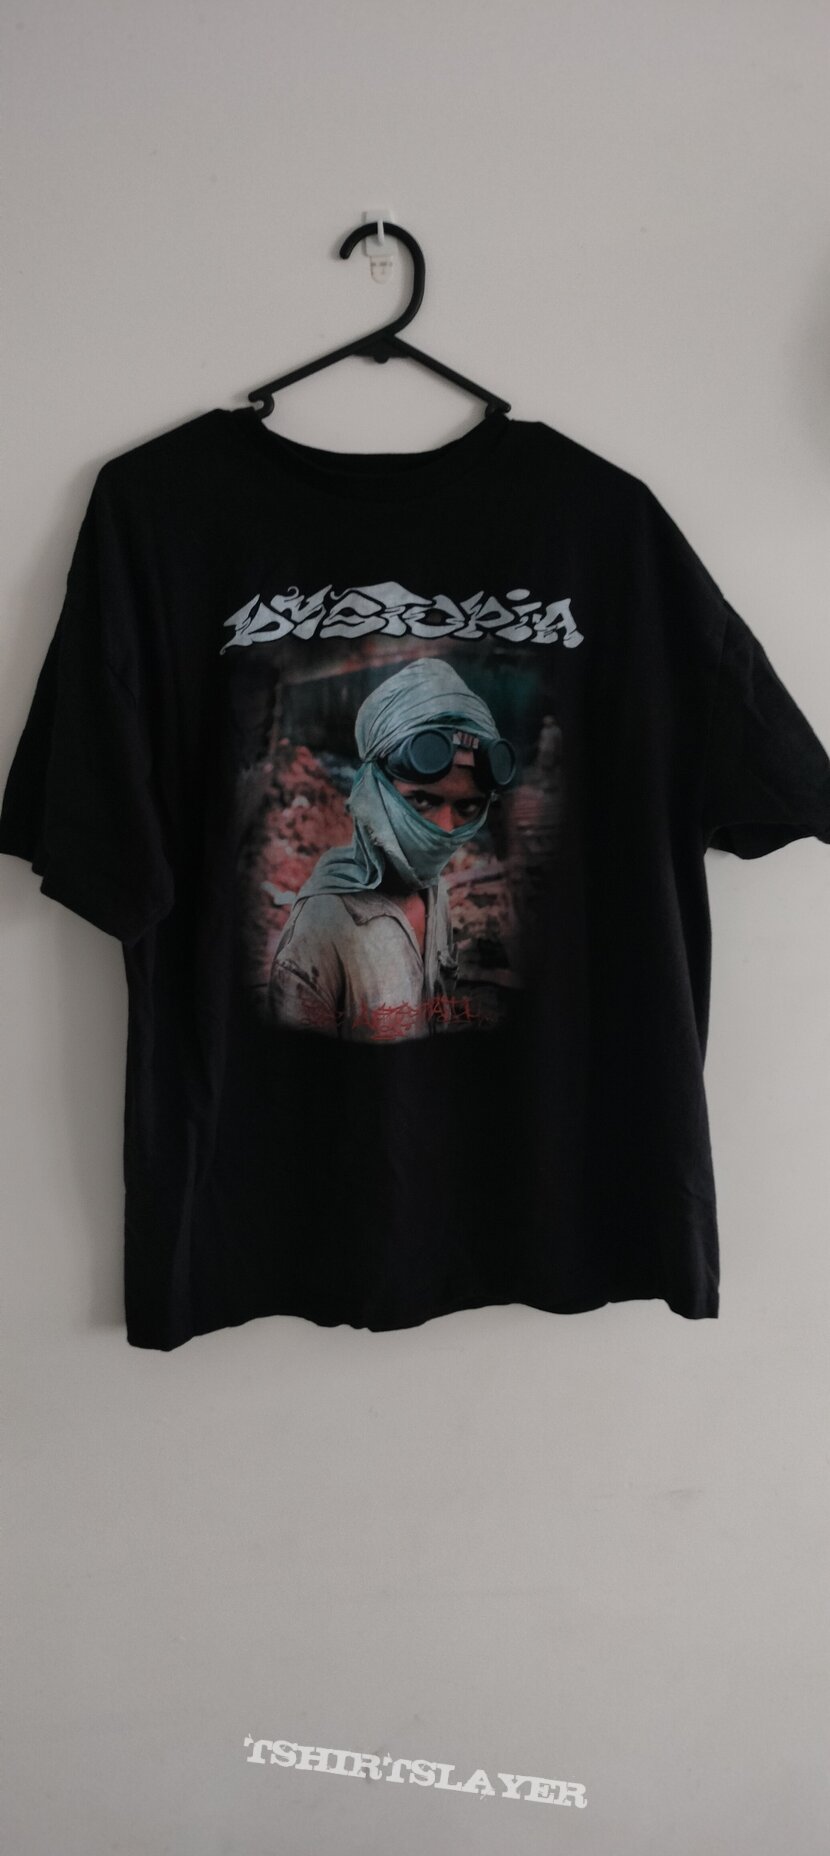 Dystopia The Aftermath T-shirt